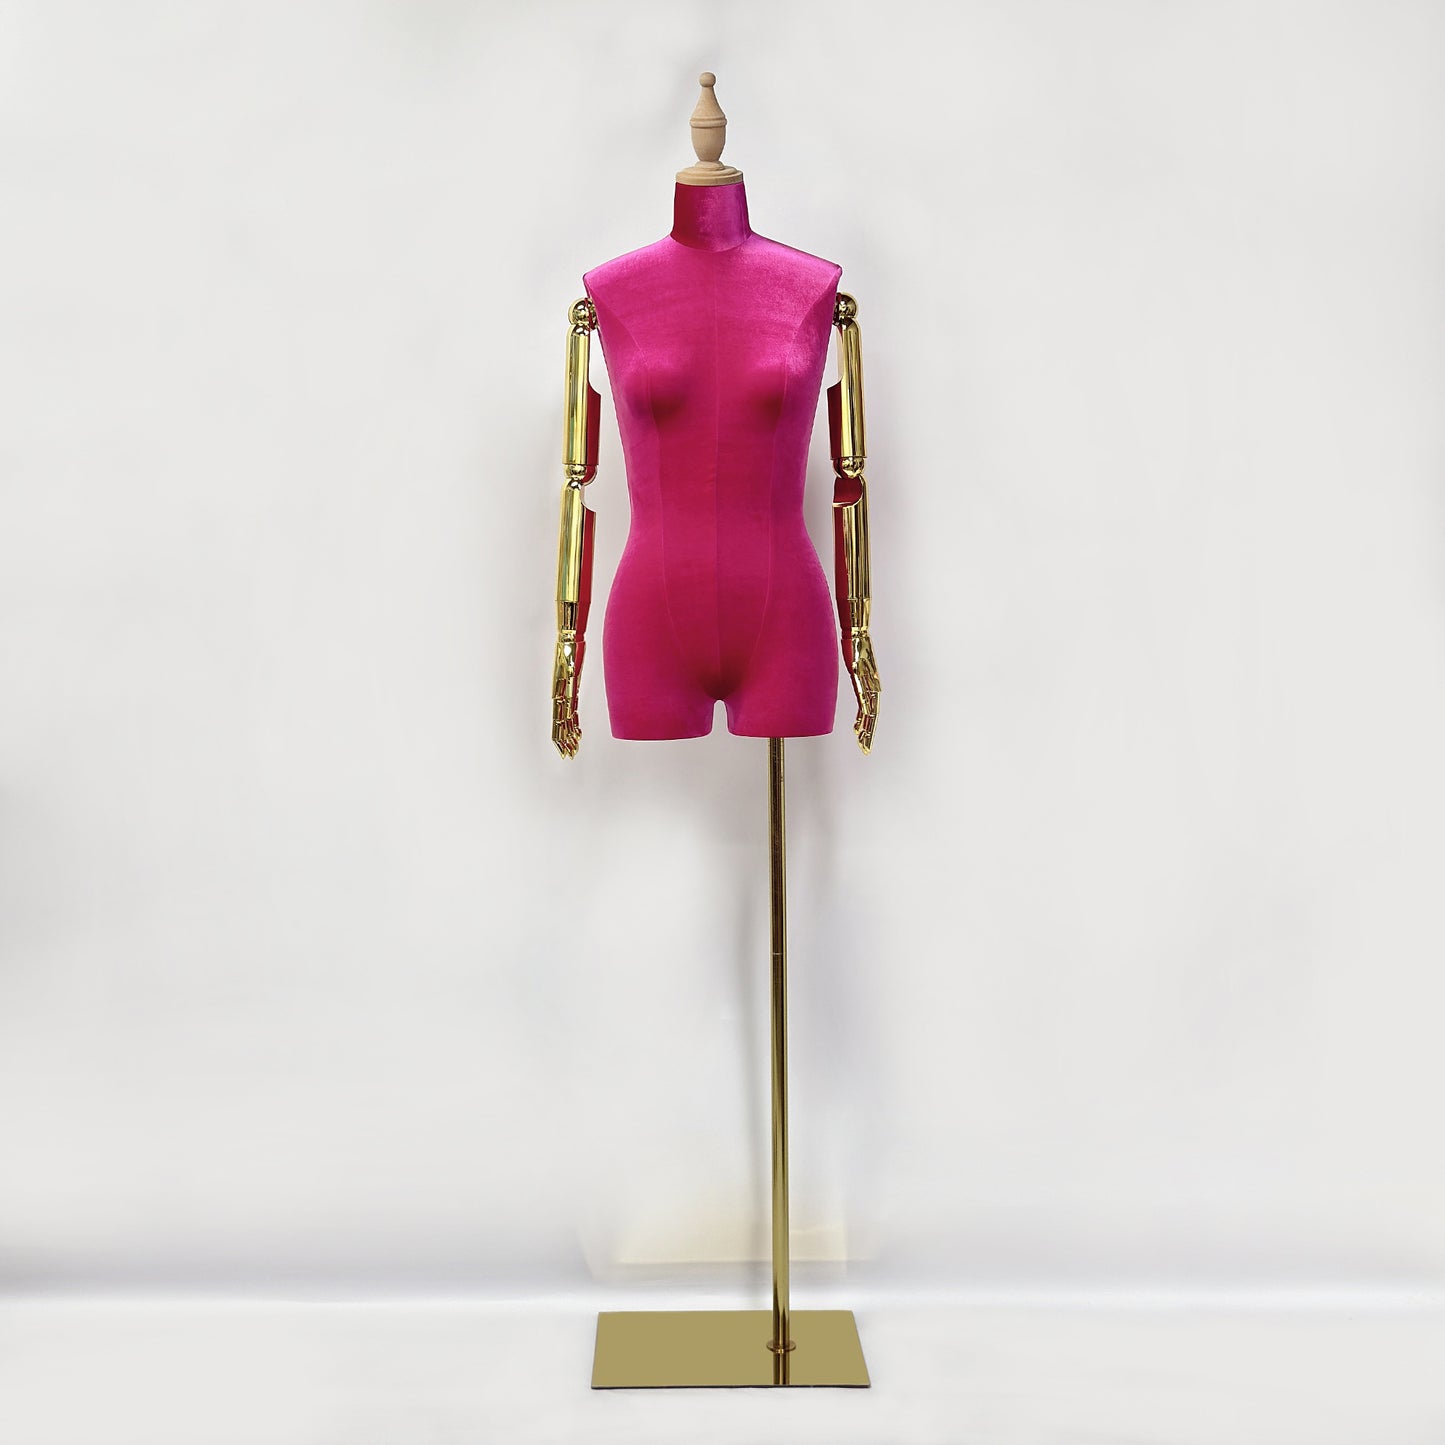 Jelimate High Quality Female Plus Size Mannequin With Gold Arms,Window Display Beige Pink Velvet Dress Form Torso,Women Clothing Store Clothing Display Model